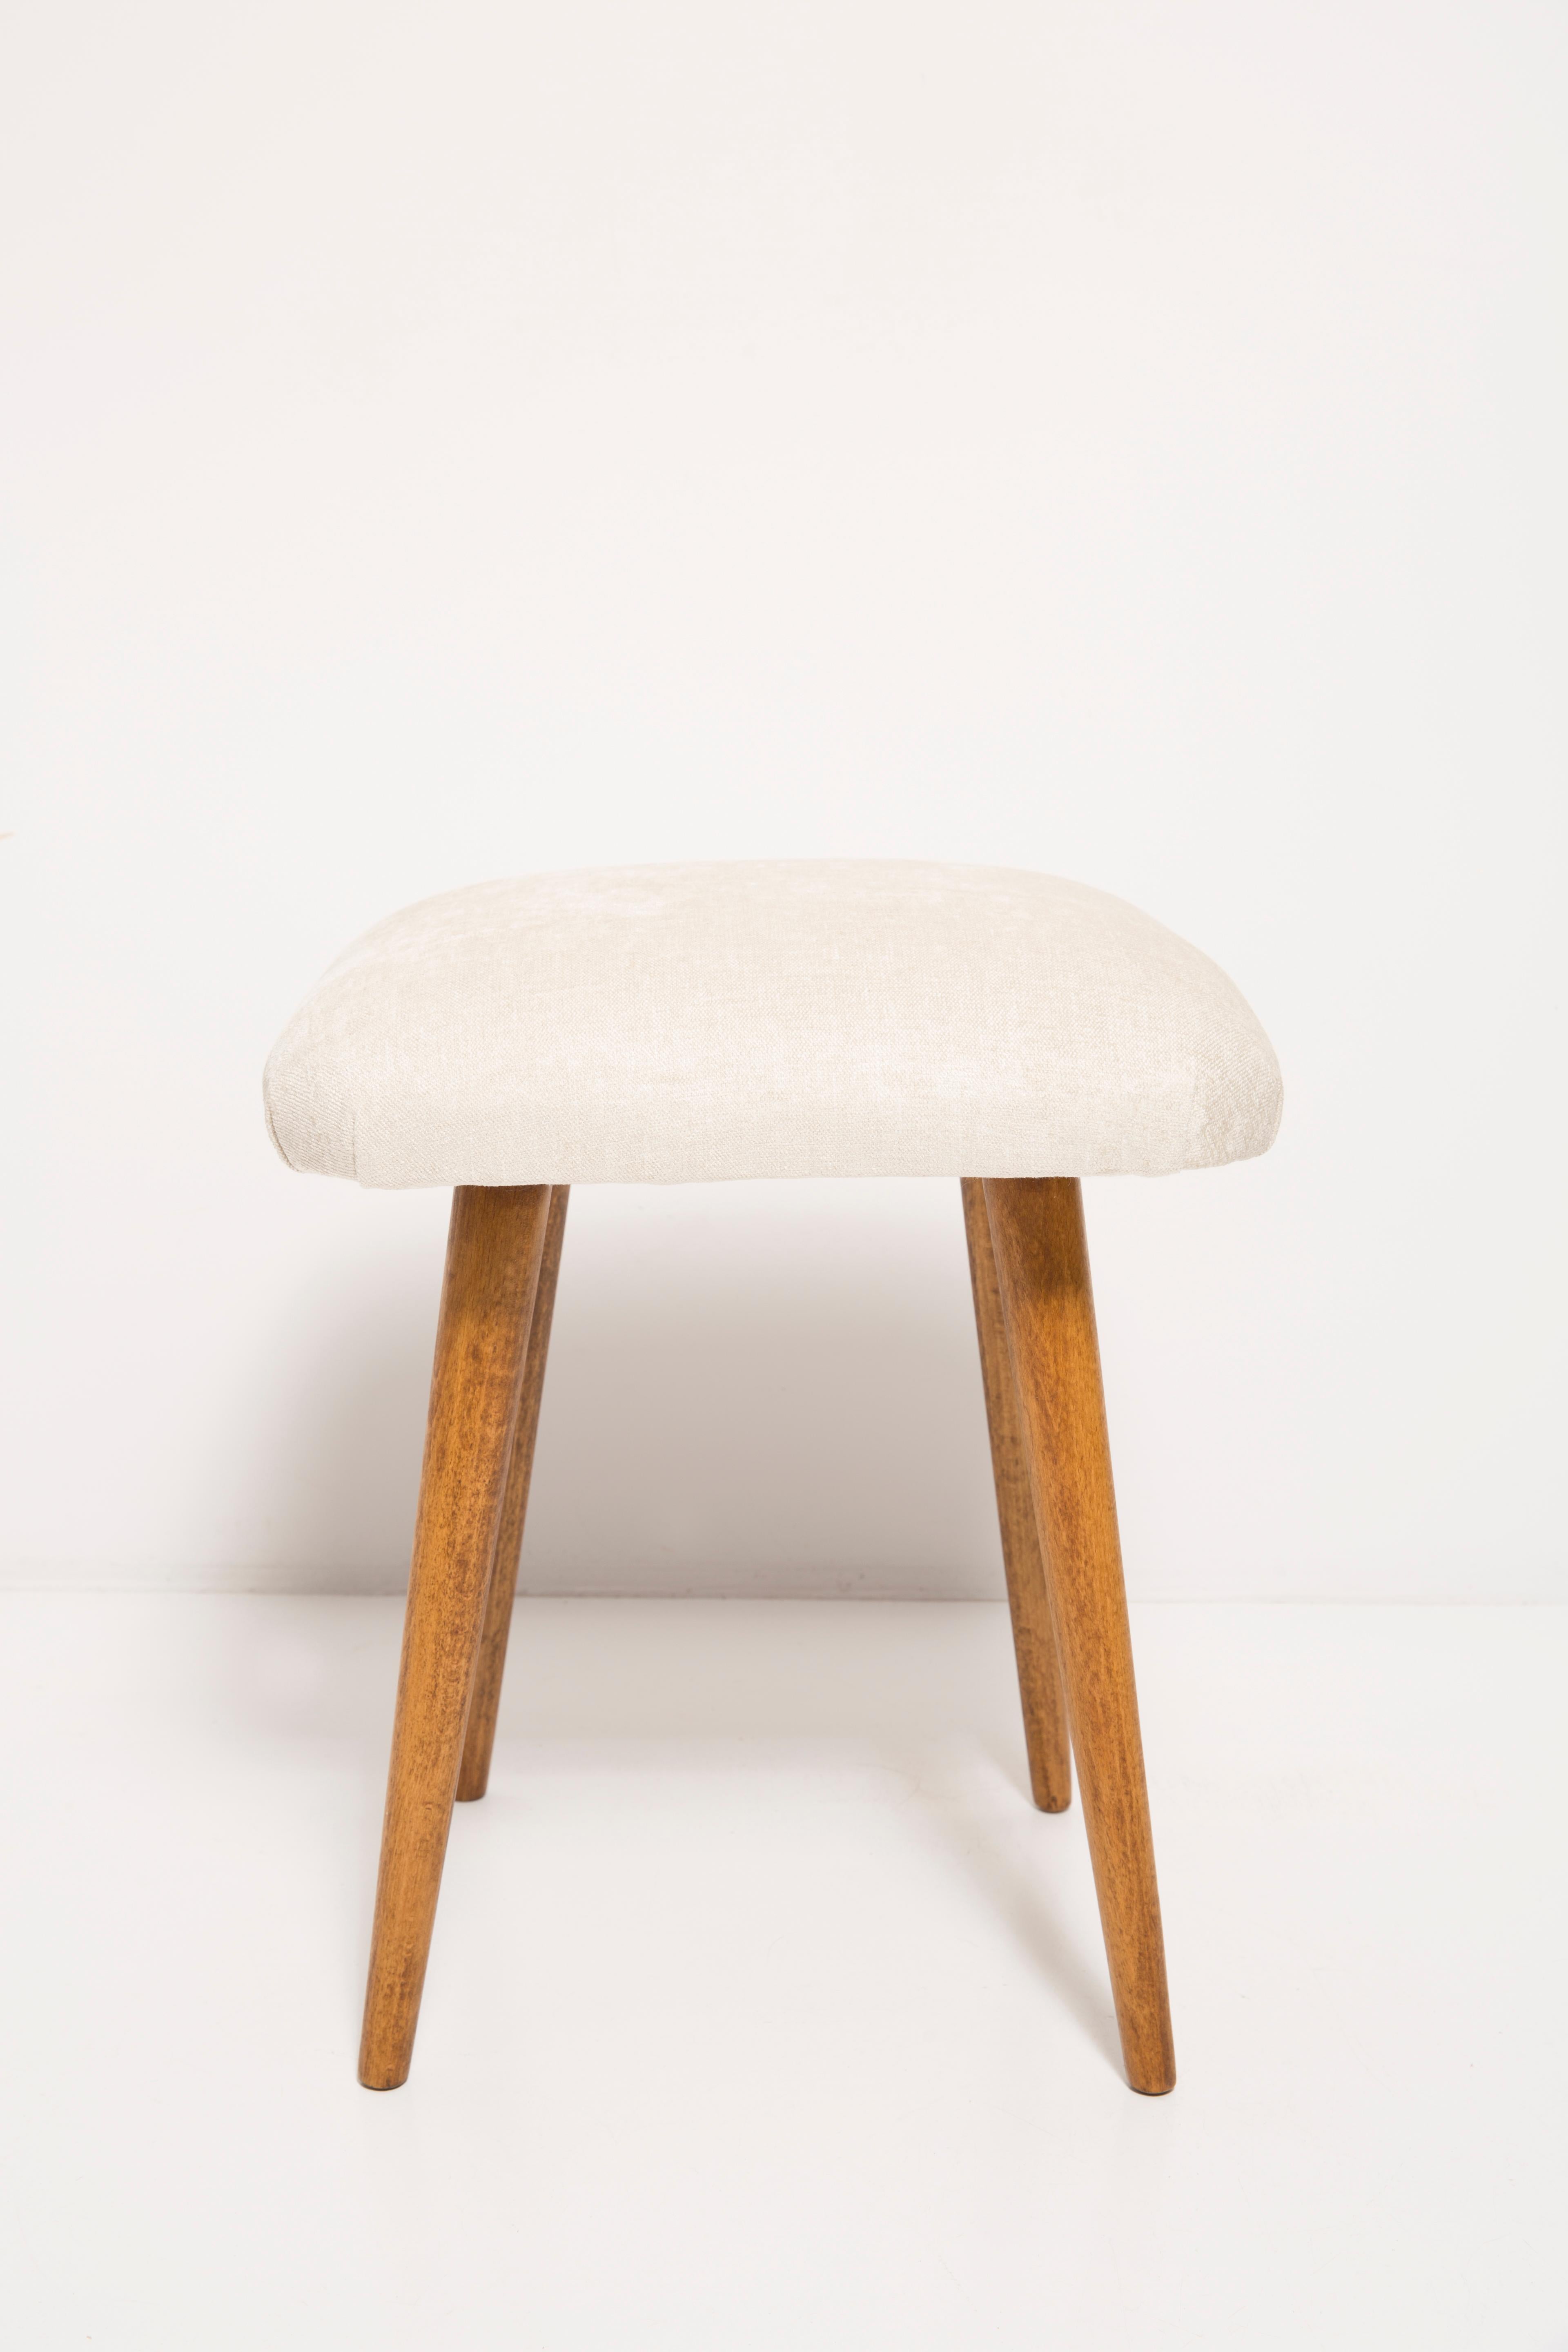 Stools from the turn of the 1960s and 1970s. Beautiful light beige upholstery. The stools consists of an upholstered part, a seat and wooden legs narrowing downwards, characteristic of the 1960s style. We can prepare this pair also in another color